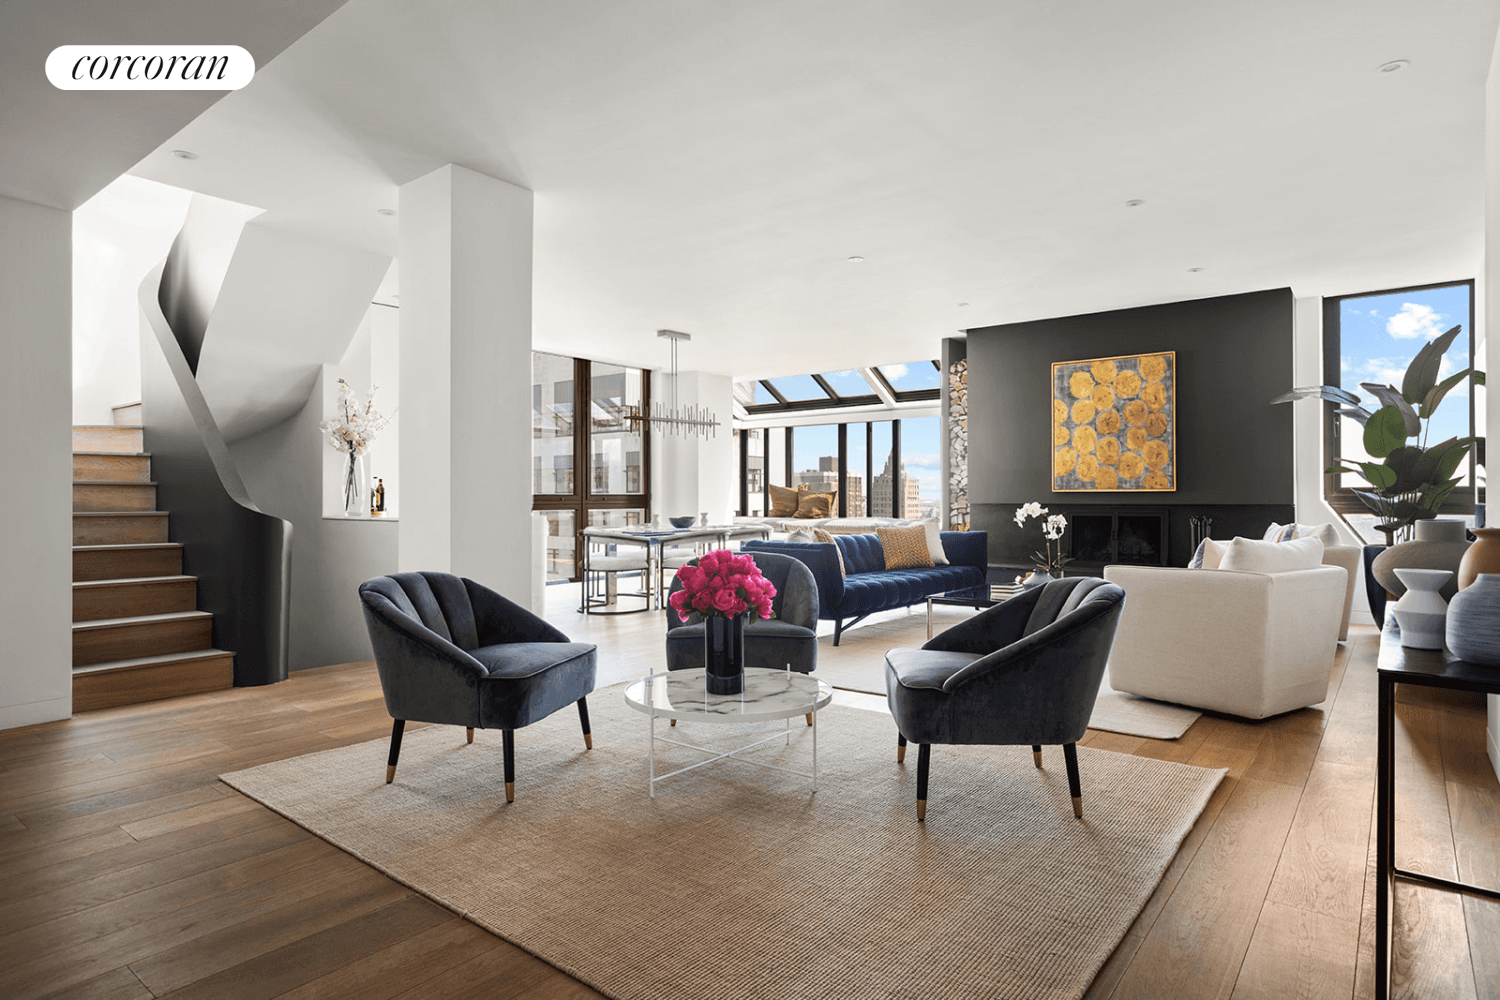 Welcome to Penthouse A, where luxury meets convenience in the heart of Midtown East.